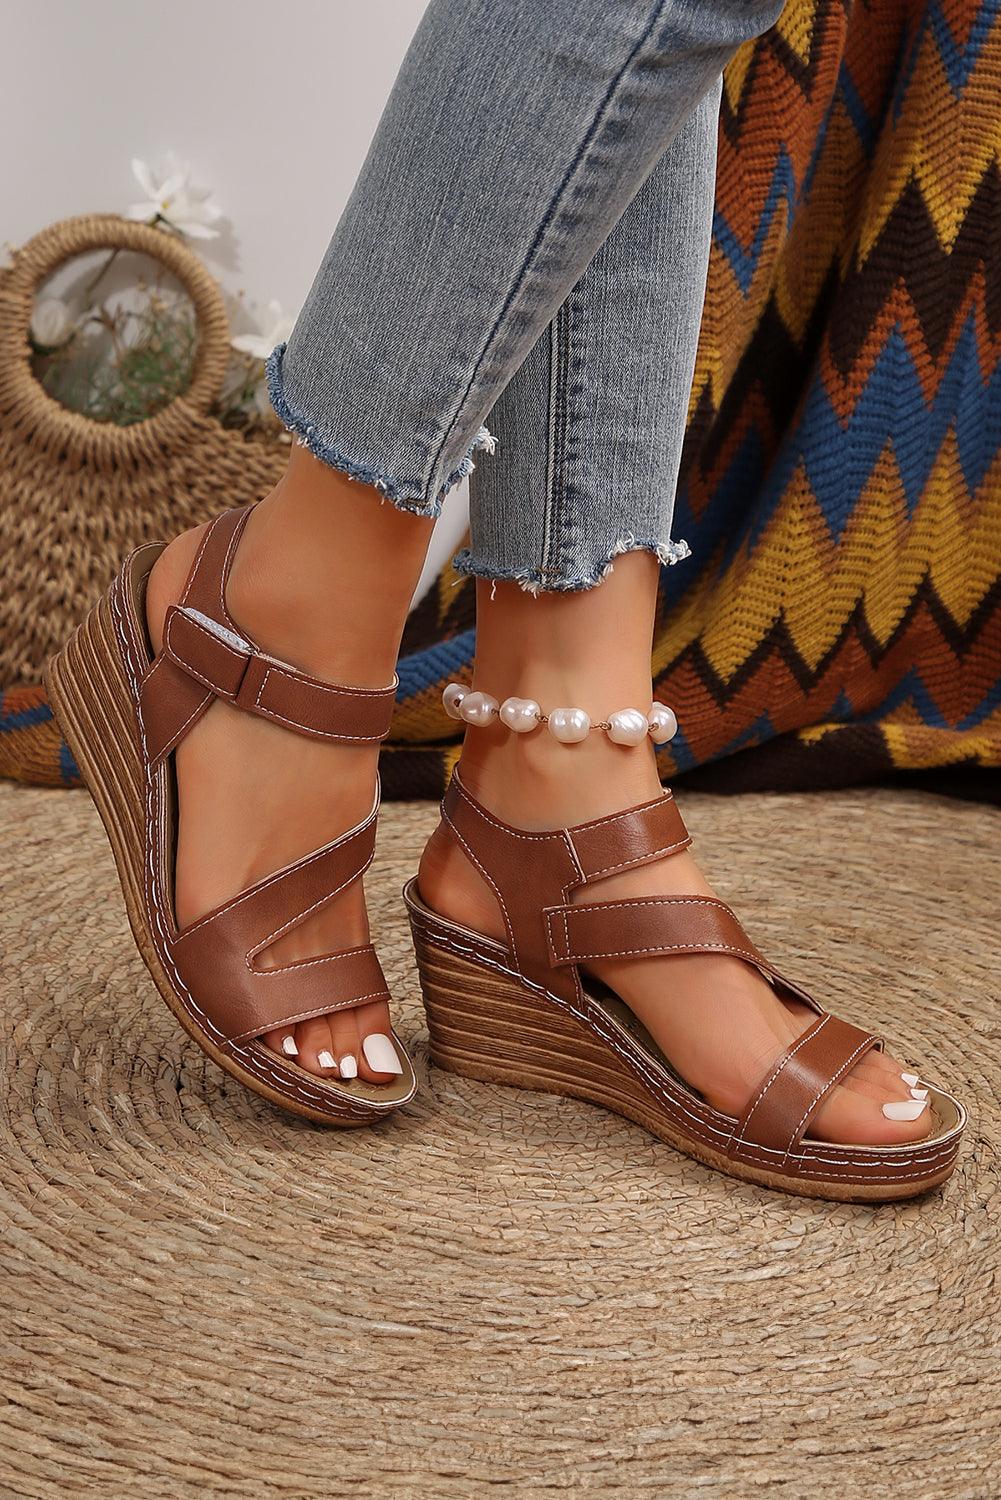 Chestnut Hollow Out PU Leather Wedge Sandals - L & M Kee, LLC